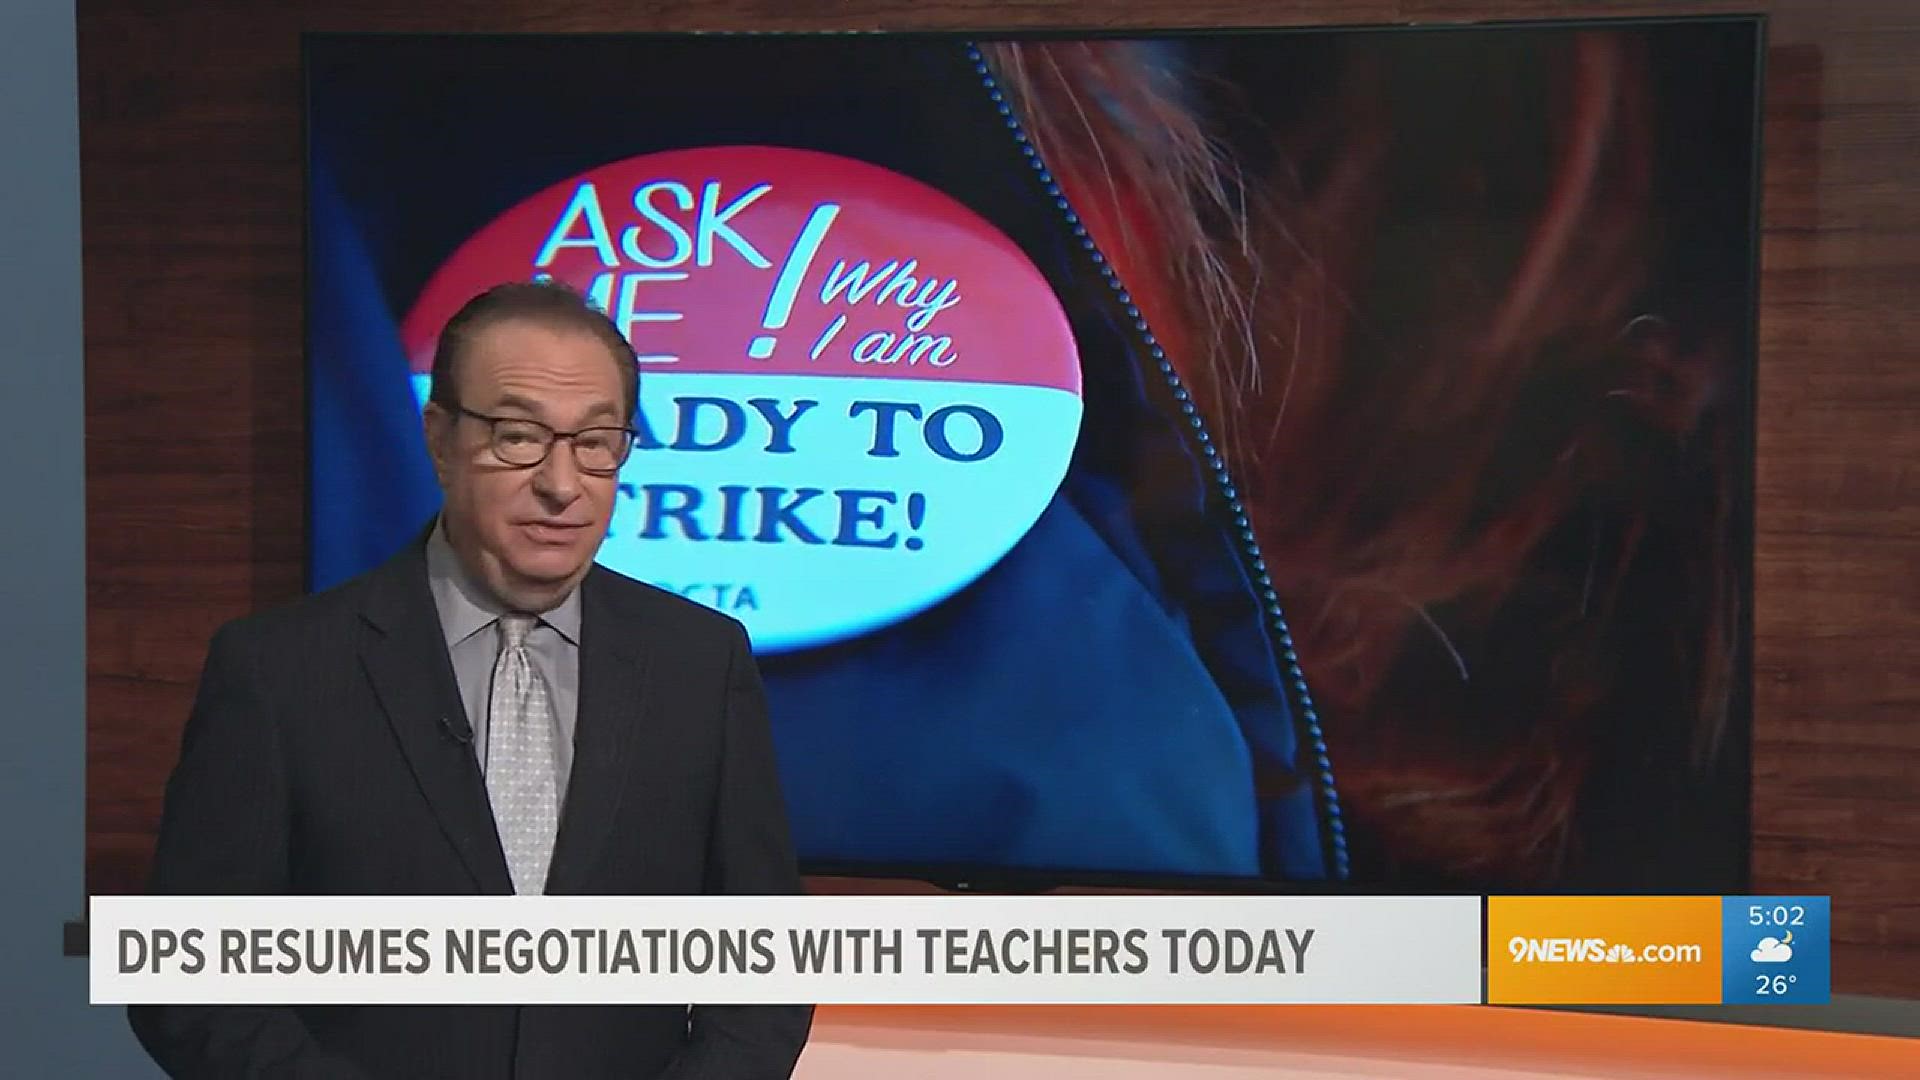 Denver Public Schools is set to resume negations with teachers on salary. 9news reporter Eddie Randle reports live from DPS headquarters on the negotiation details.